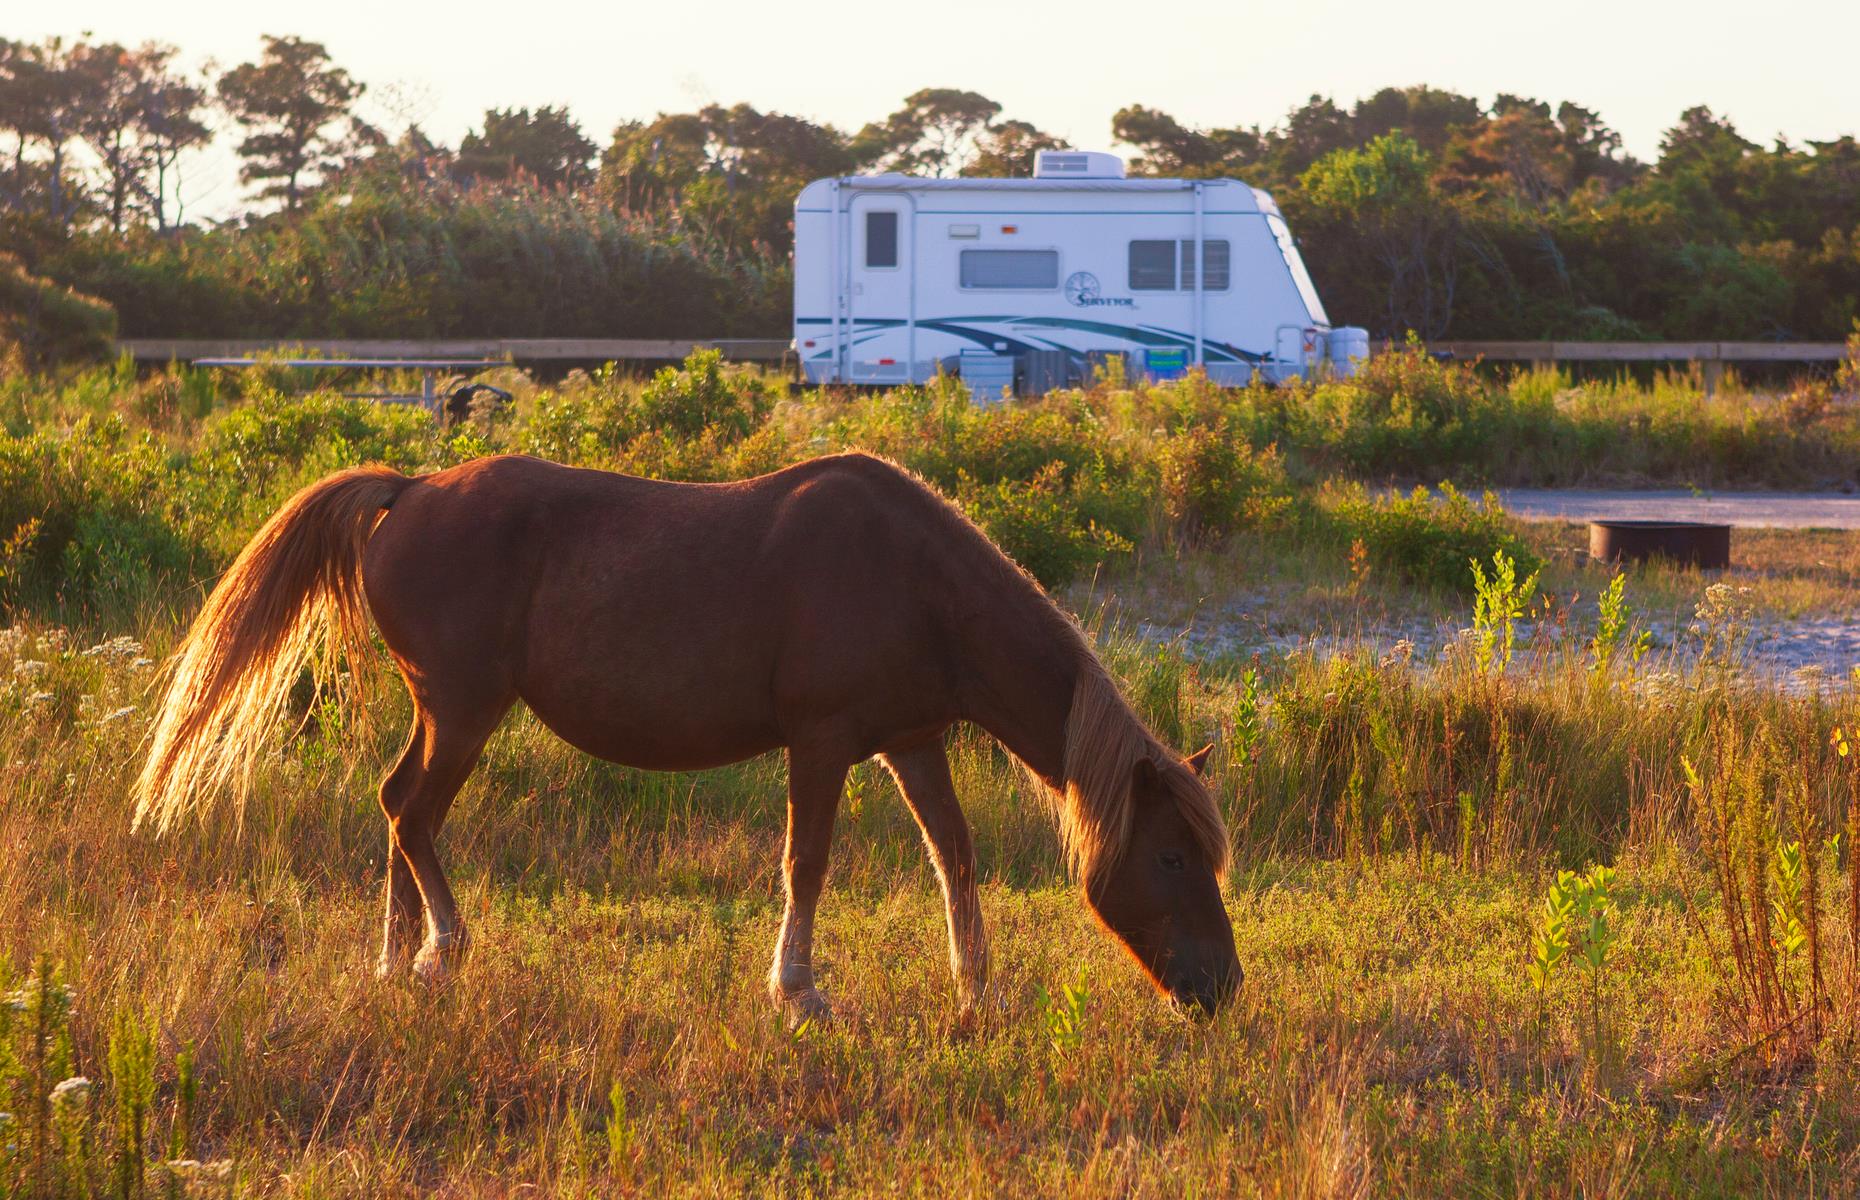 <p>The Maryland portion of this barrier island (which also stretches into Virginia) has several (reservation only) <a href="https://www.nps.gov/asis/planyourvisit/marylandcamping.htm">RV camping spots</a> right by its pale, biscuit dunes. The landscape of rolling sand hills, shrubs and endless Atlantic Ocean views would be enough of a draw. Add in around 150 wild ponies which can frequently be seen grazing on dune grass or snoozing in the sand and it’s pretty much perfection.</p>